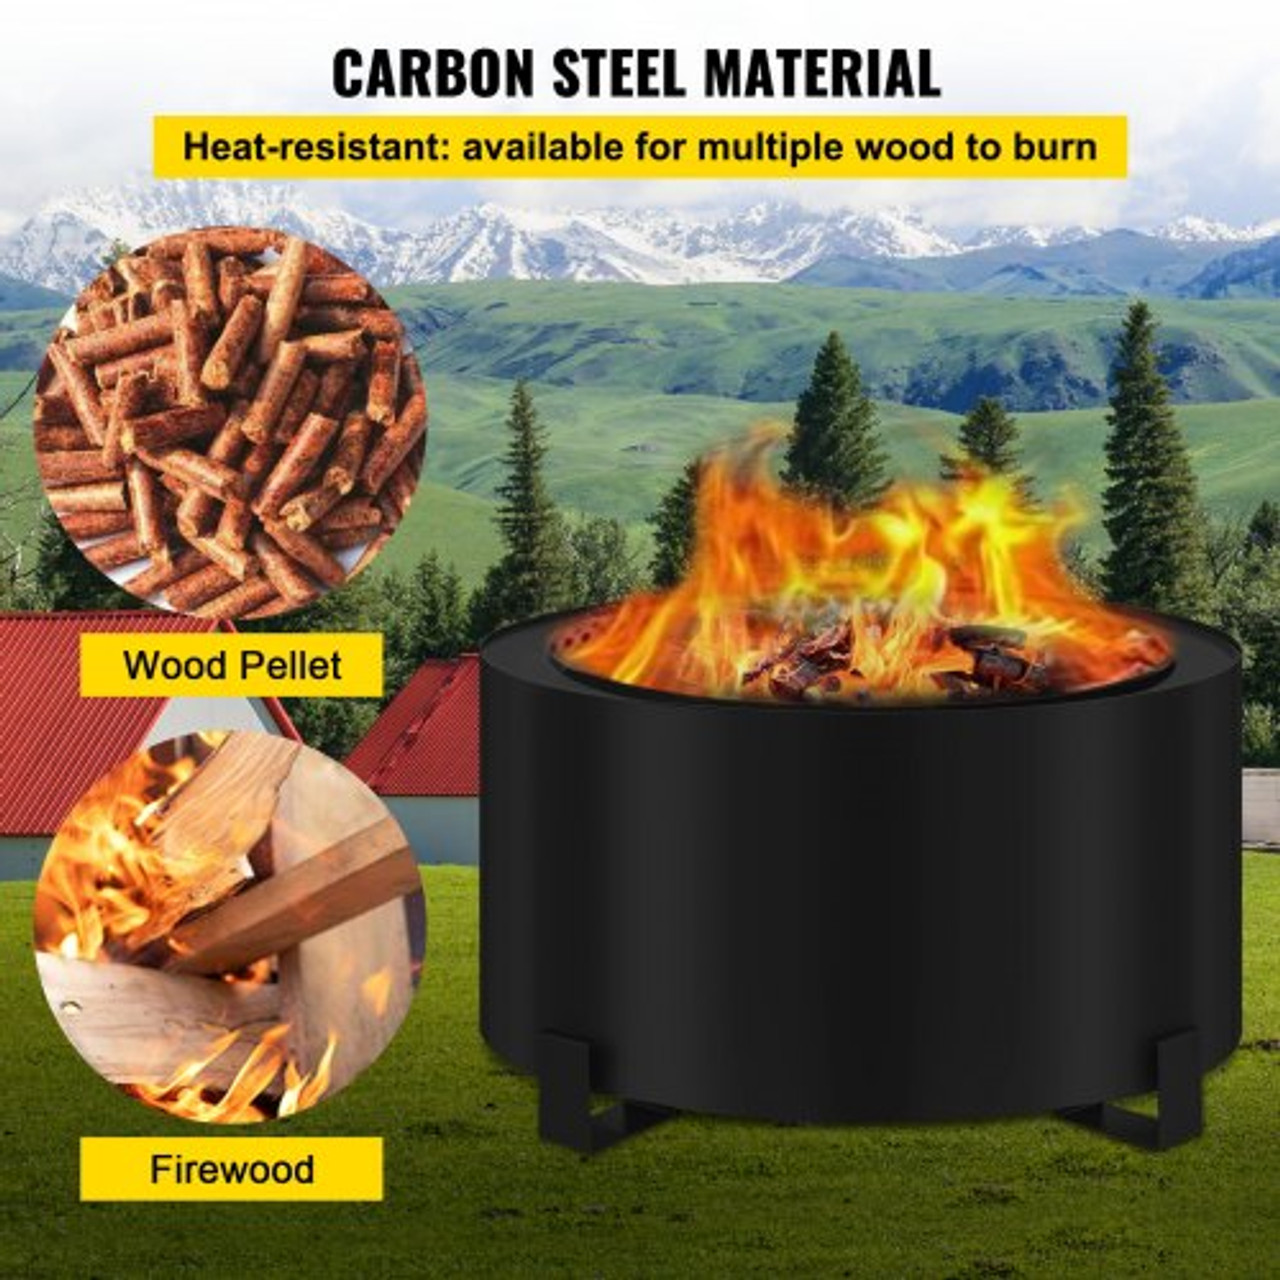 Stove Bonfire, Carbon Steel Smokeless Fire Pit, 23.6-inch Diameter Stove Bonfire Fire Pit, Double Wall Design Smokeless Fire Bowl, Portable Wood Burning Fire Pit for Outdoor Picnic Camping Black